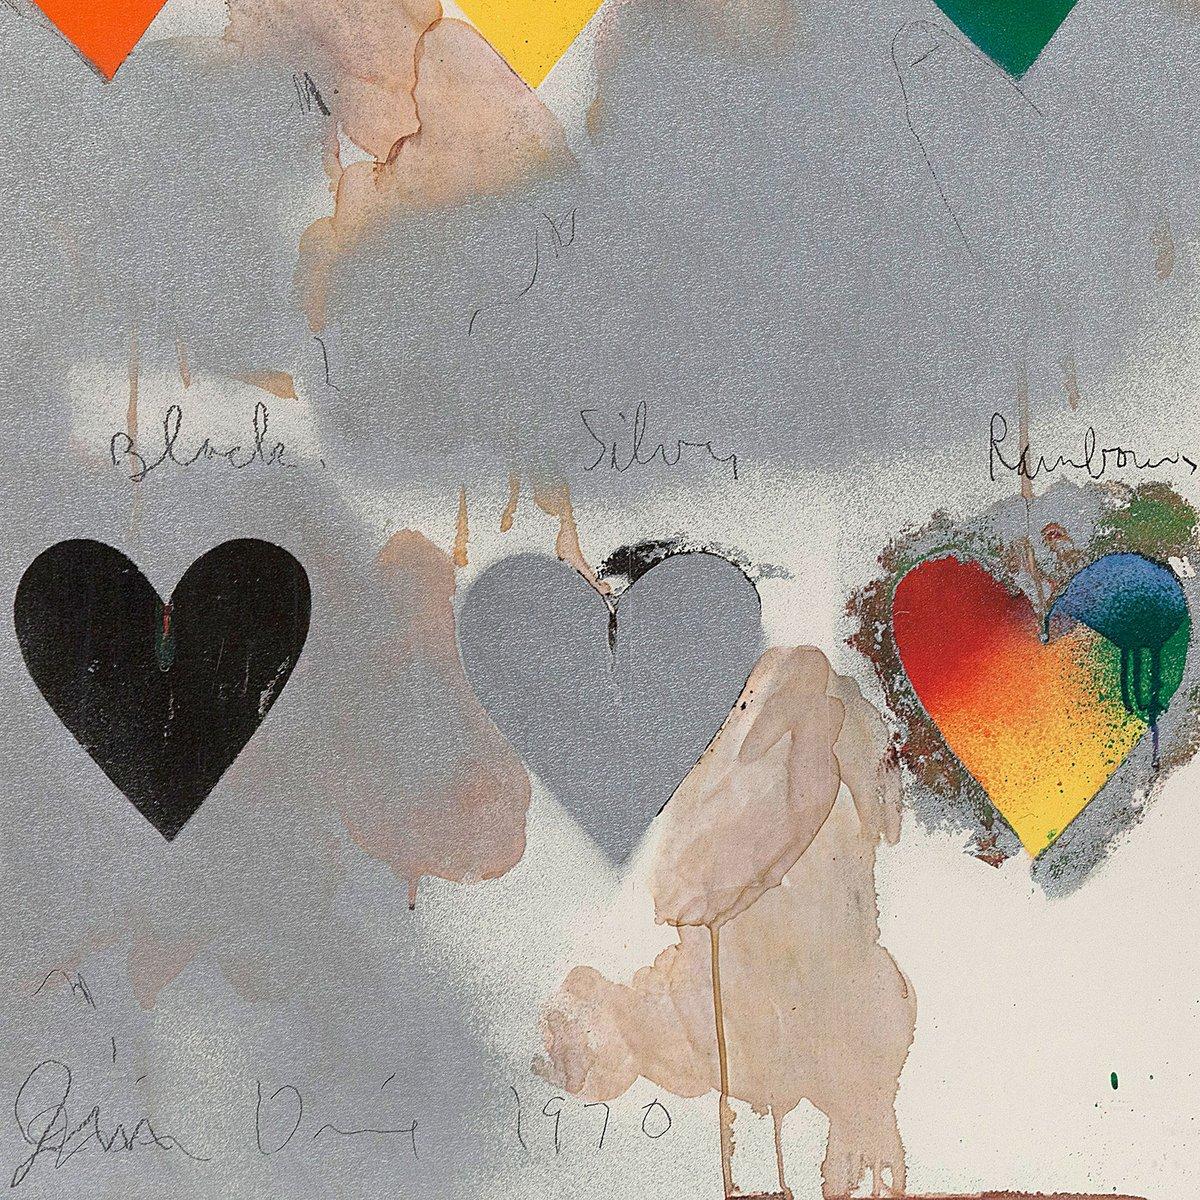 8 Hearts / Look, Off-set Lithograph with metallic paper collage overlay, 1970 6